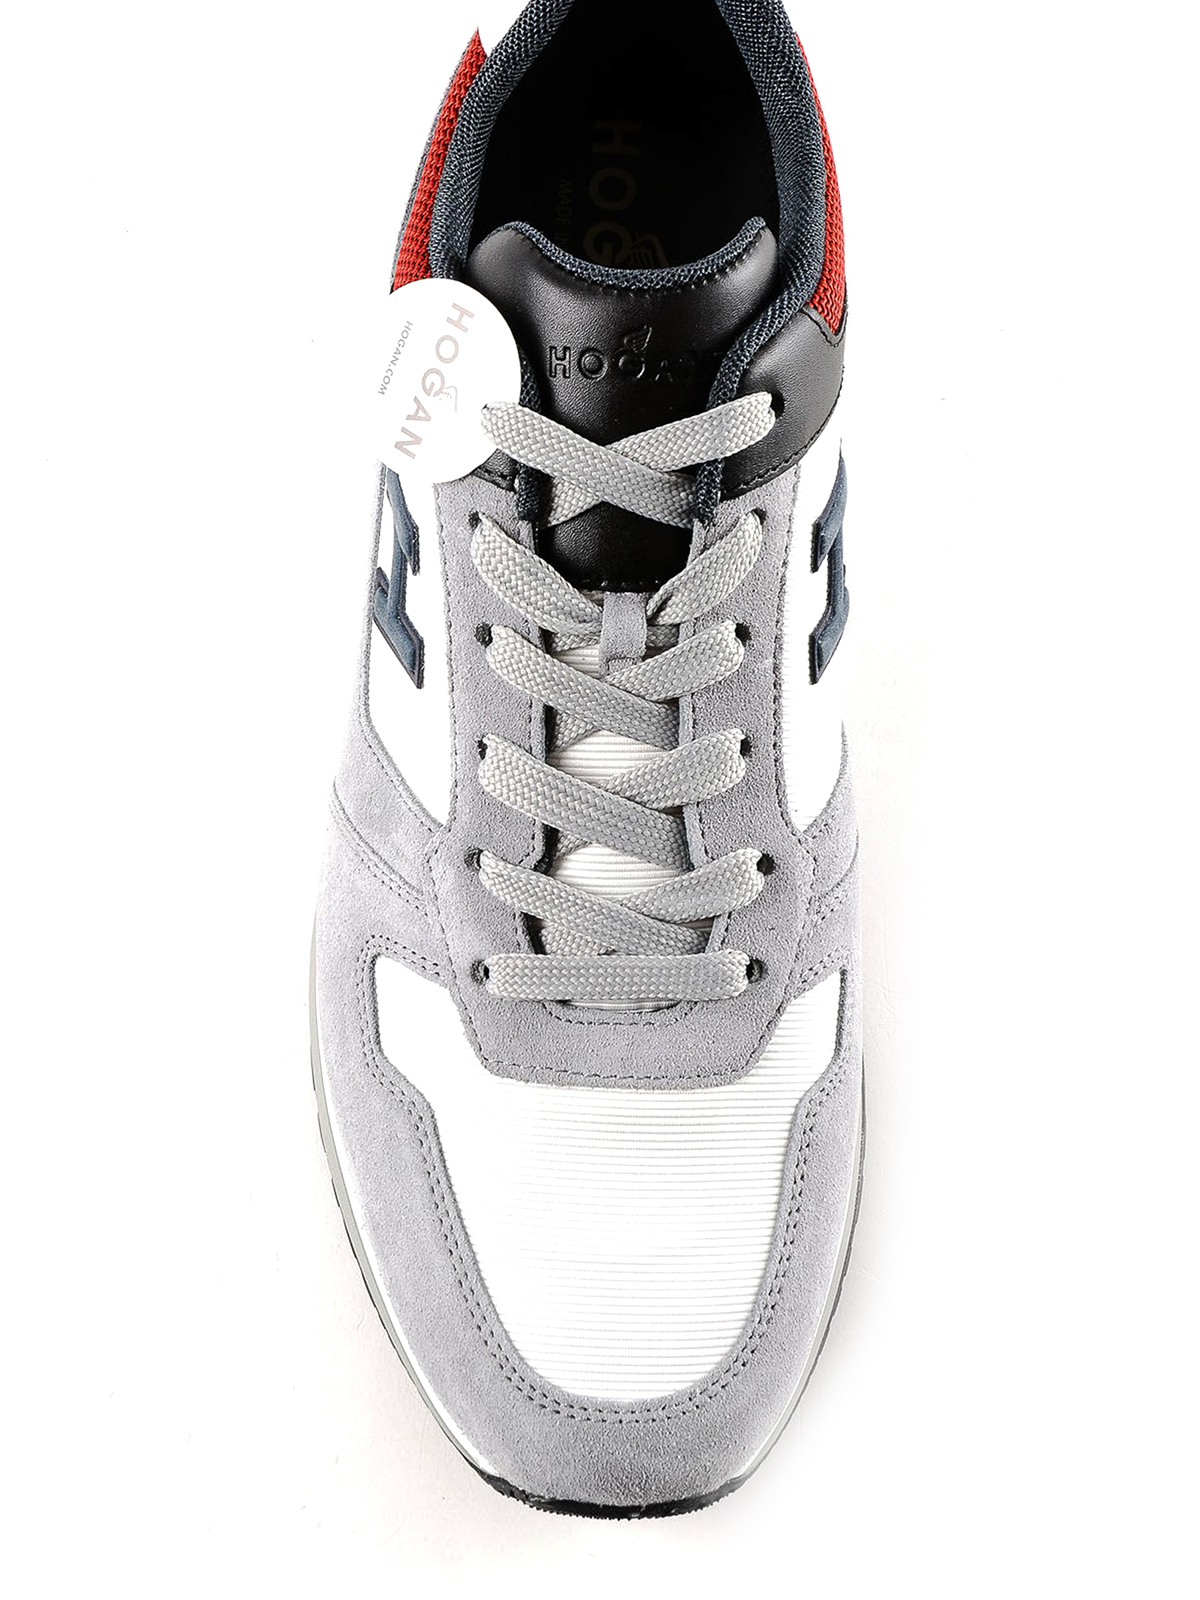 grey fabric trainers